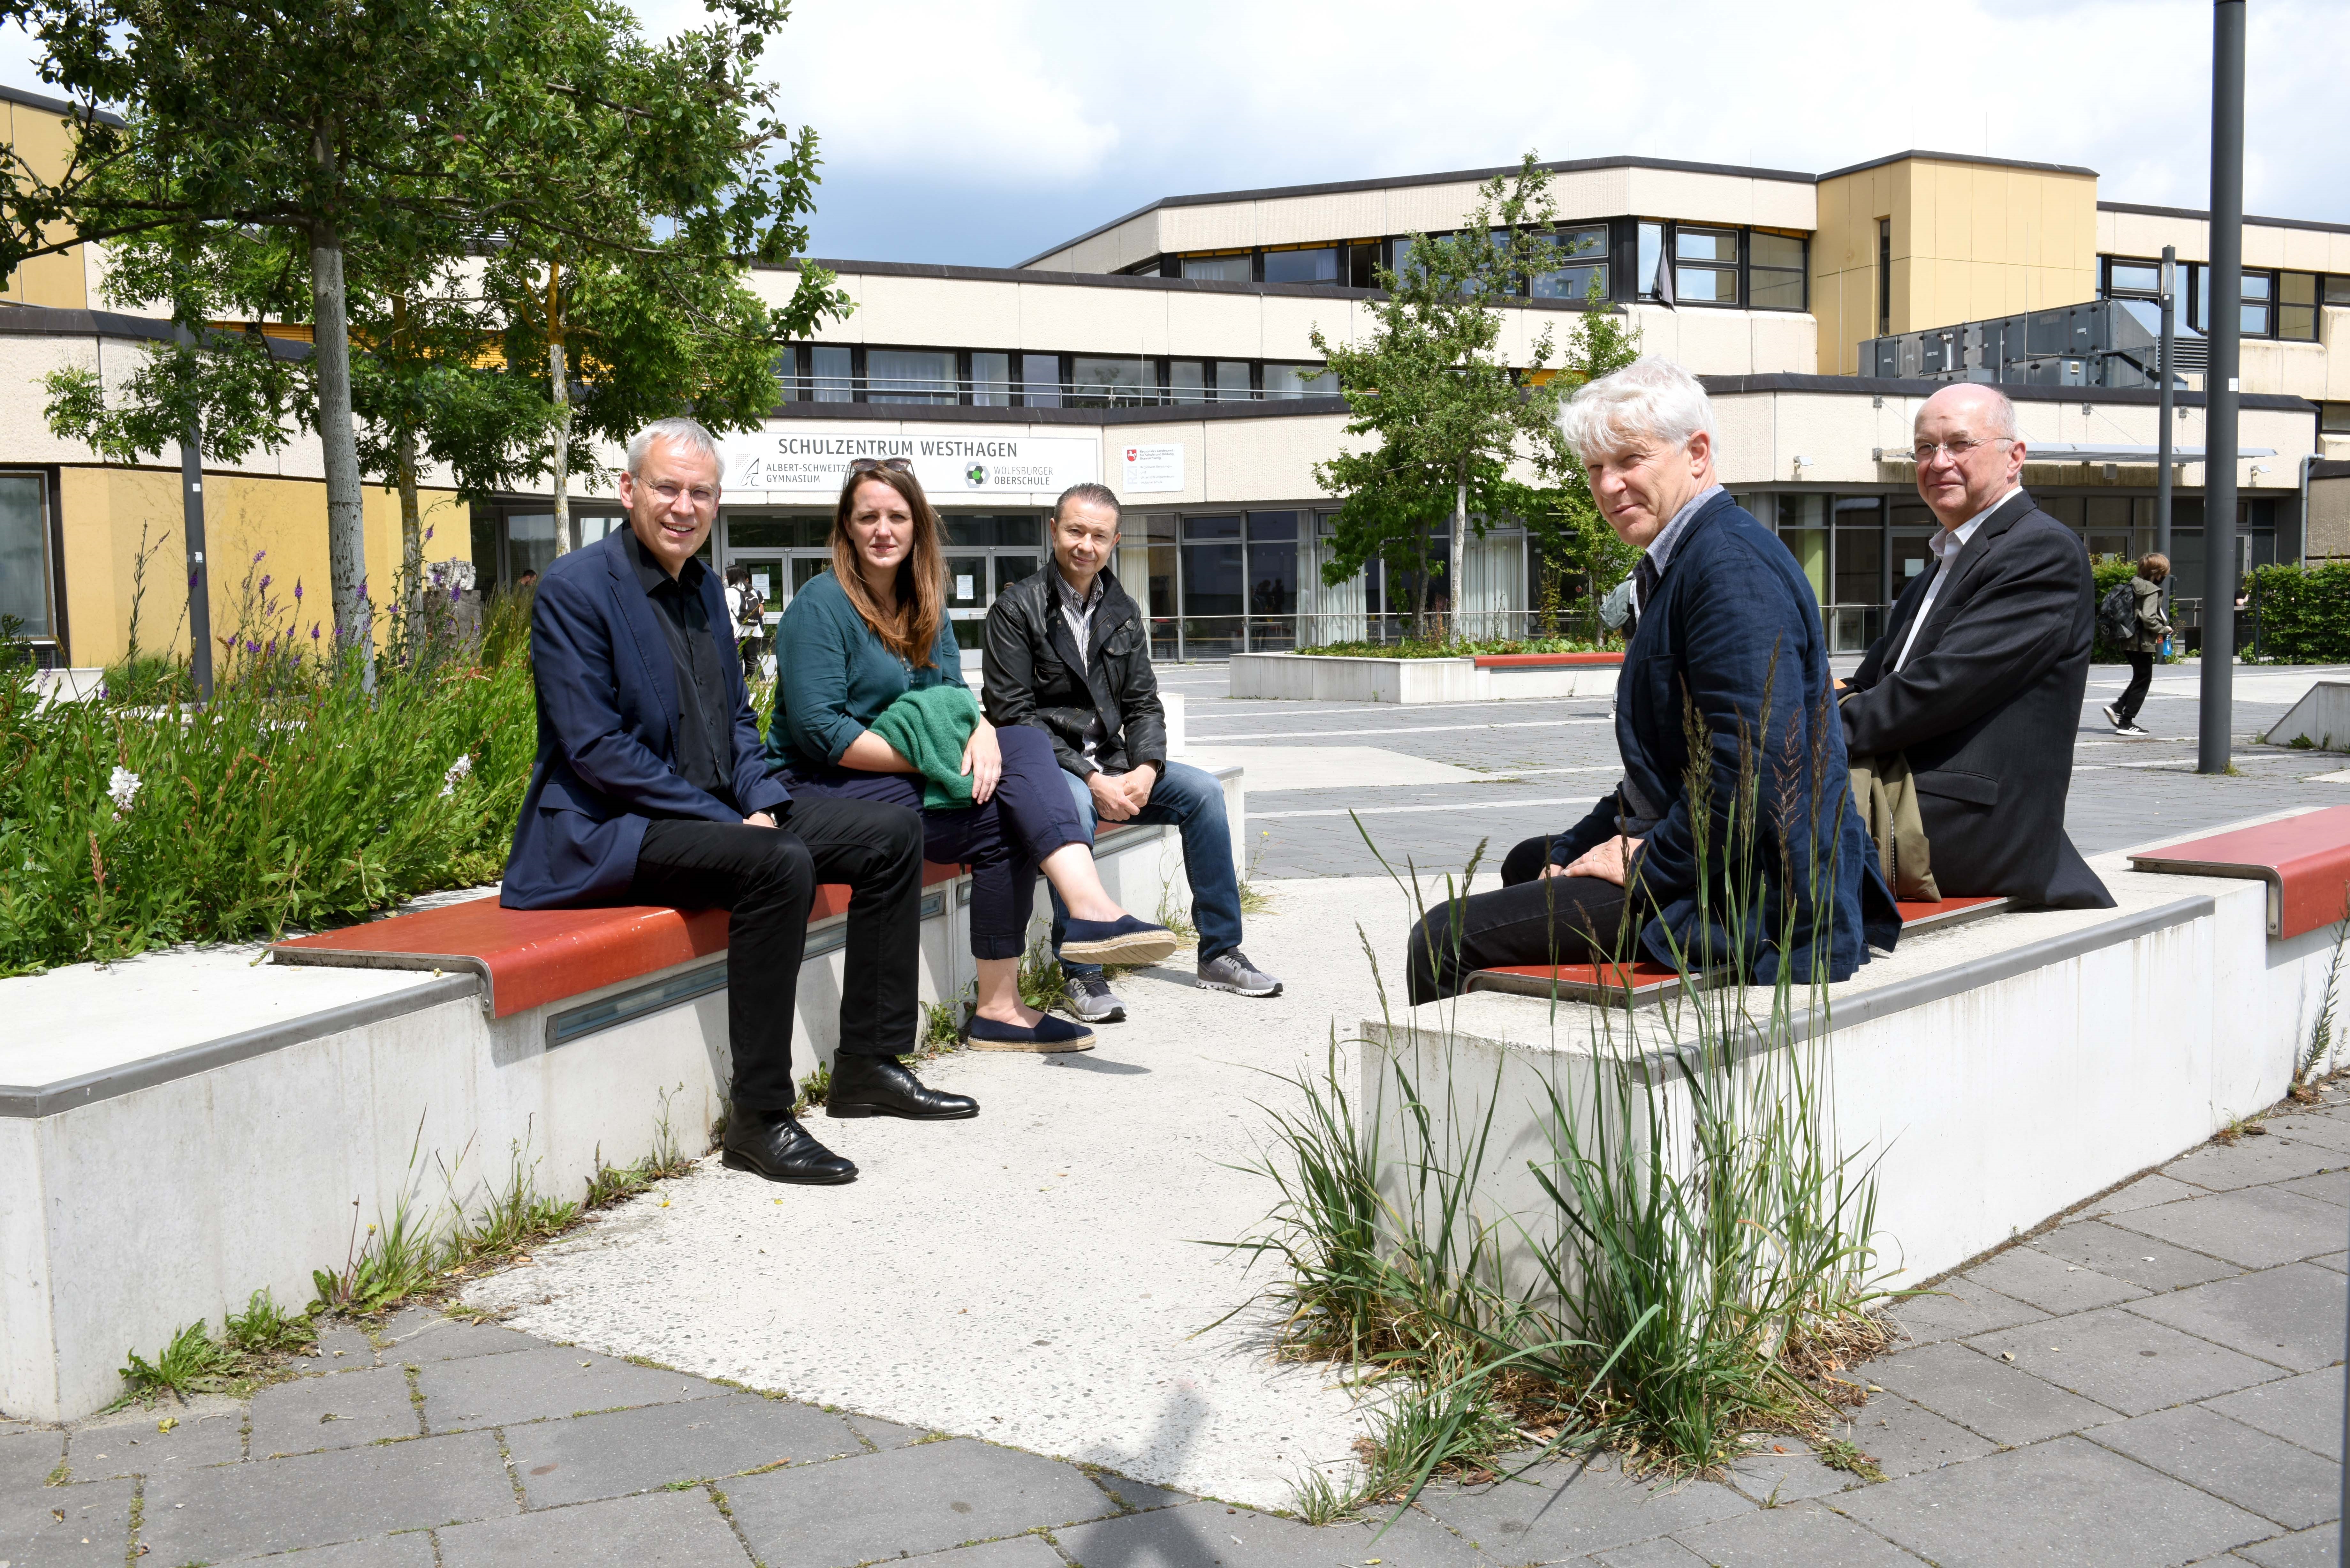 The Design Advisory Board of the City of Wolfsburg during the tour of the Westhagen School Center, 2022: (from left to right) Kai-Uwe Hirschheide, City Planning Officer of the City of Wolfsburg, Dr. Antje Backhaus, Berlin, Kai Kronschnabel, Chairman of the Planning and Building Committee, Manuel Scholl, Zurich, Prof. Dr. Georg Skalecki, Bremen.  Missing in the picture: Ingrid Spengler, Hamburg, Hans-Georg Bachmann, Planning and Building Committee.